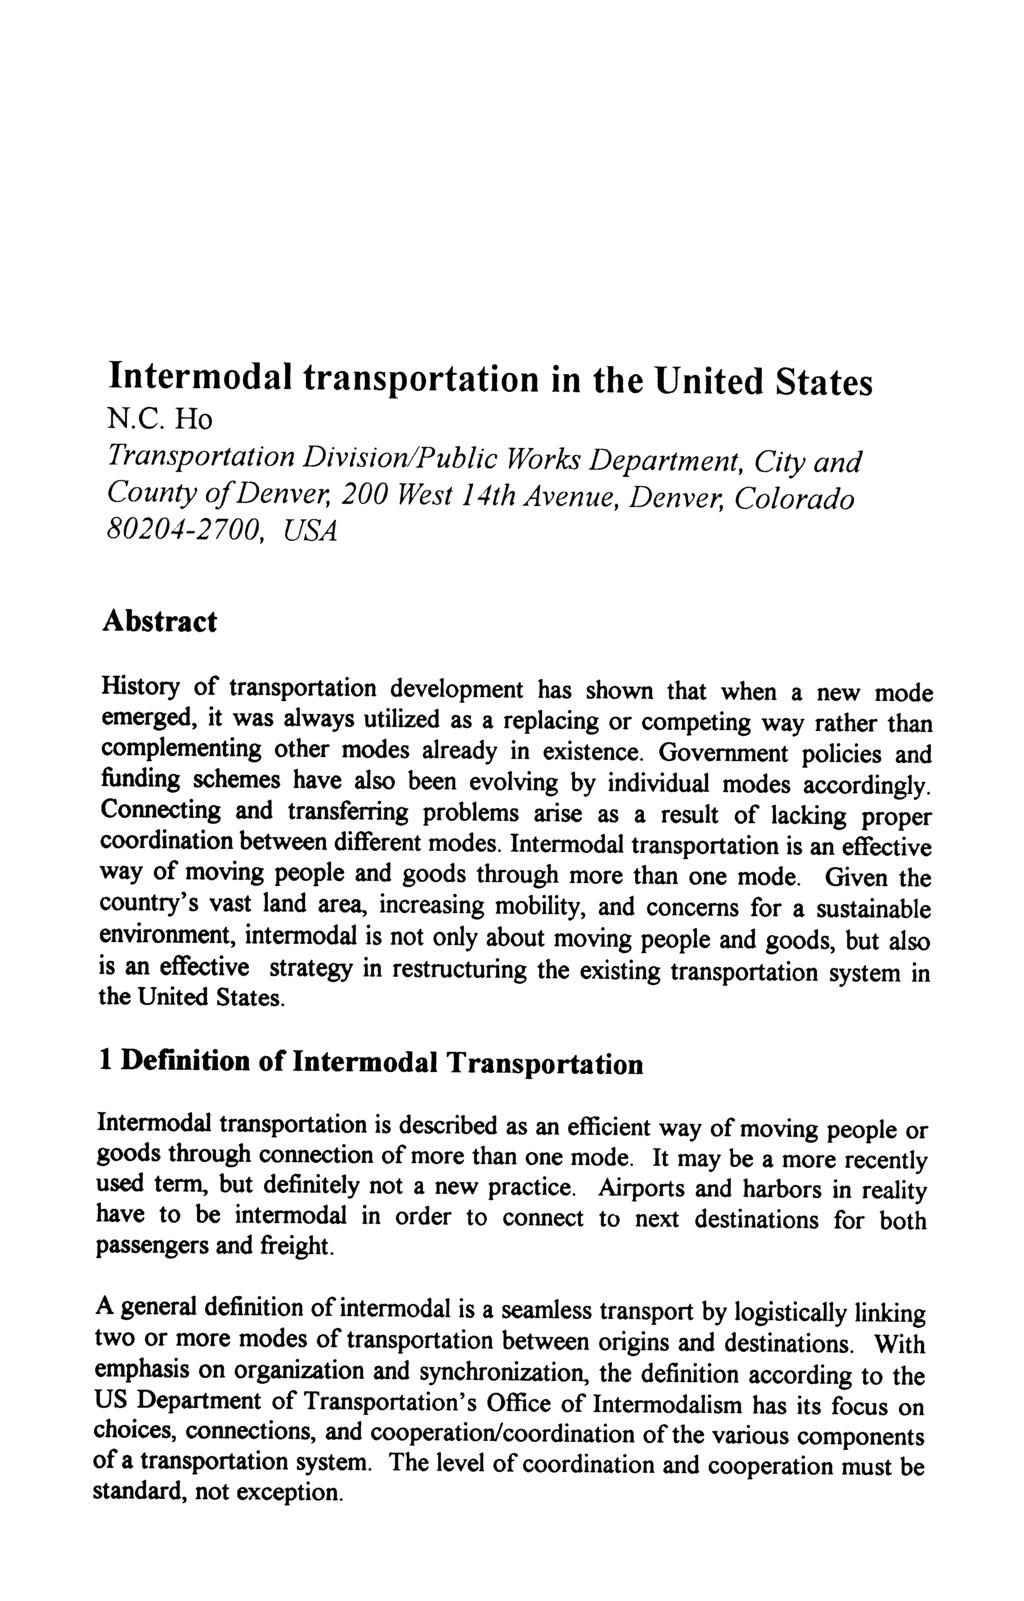 Intermodal transportation in the United States N.C.